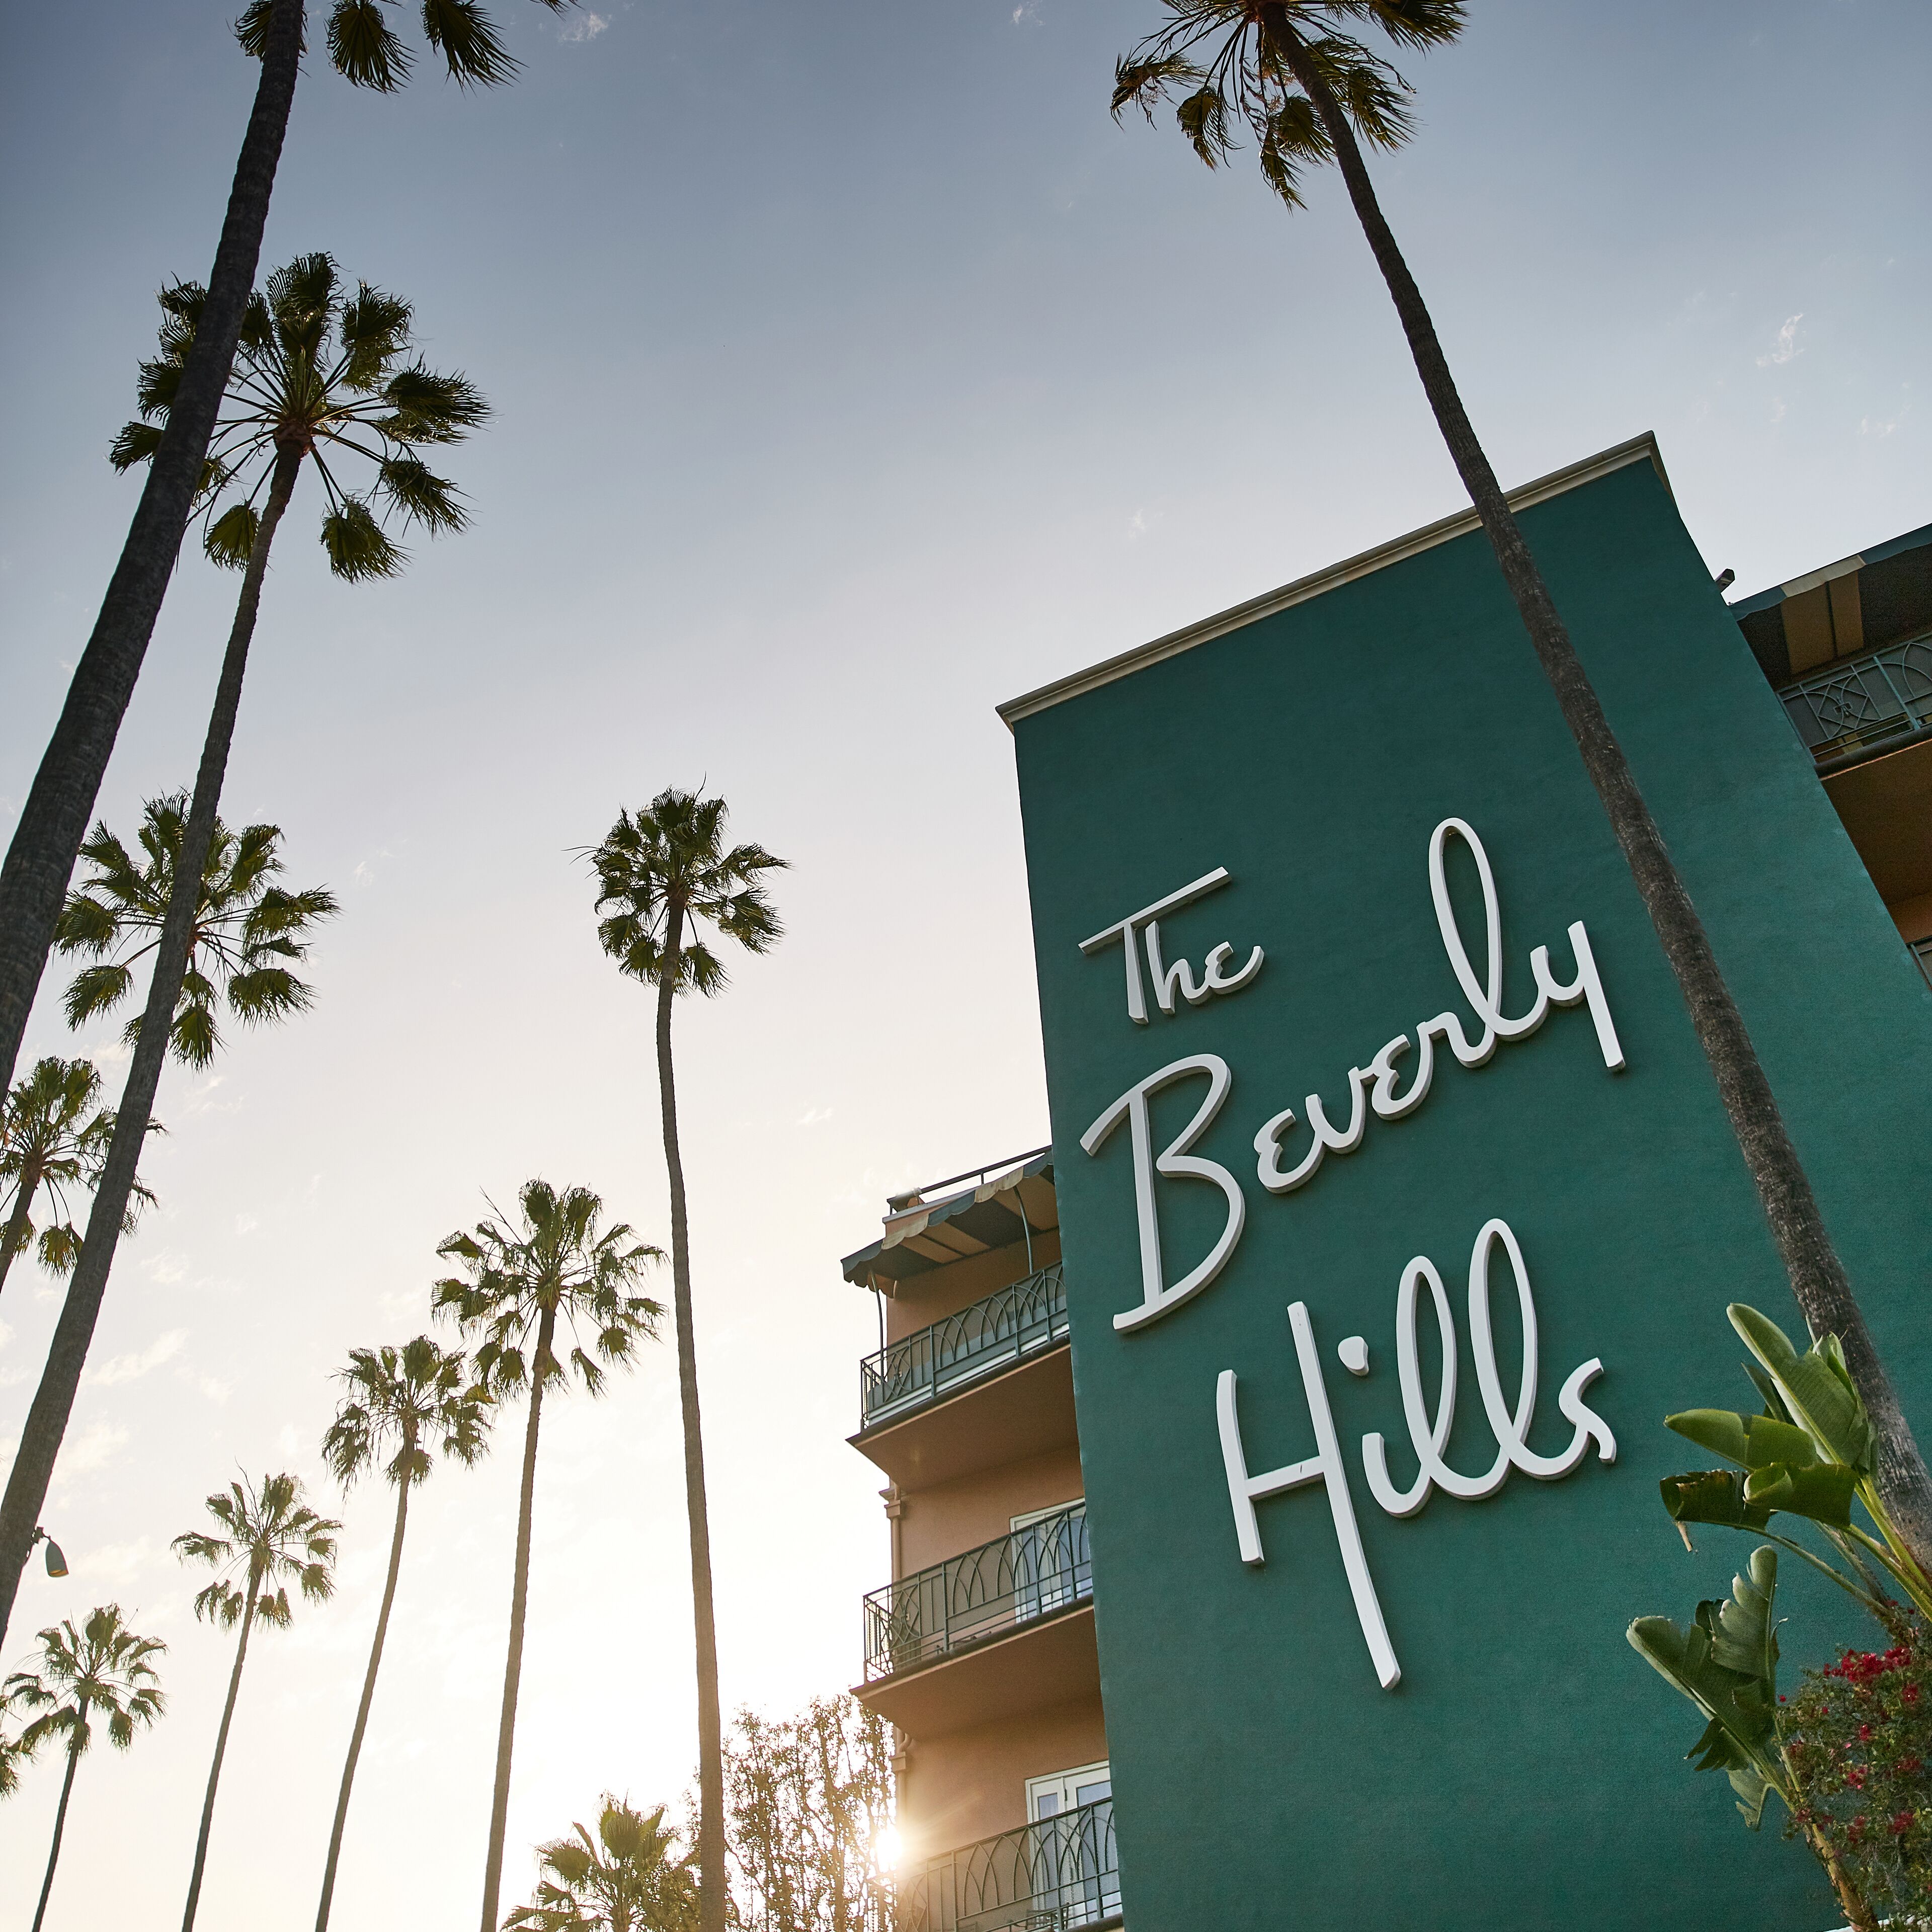 The Beverly Hills